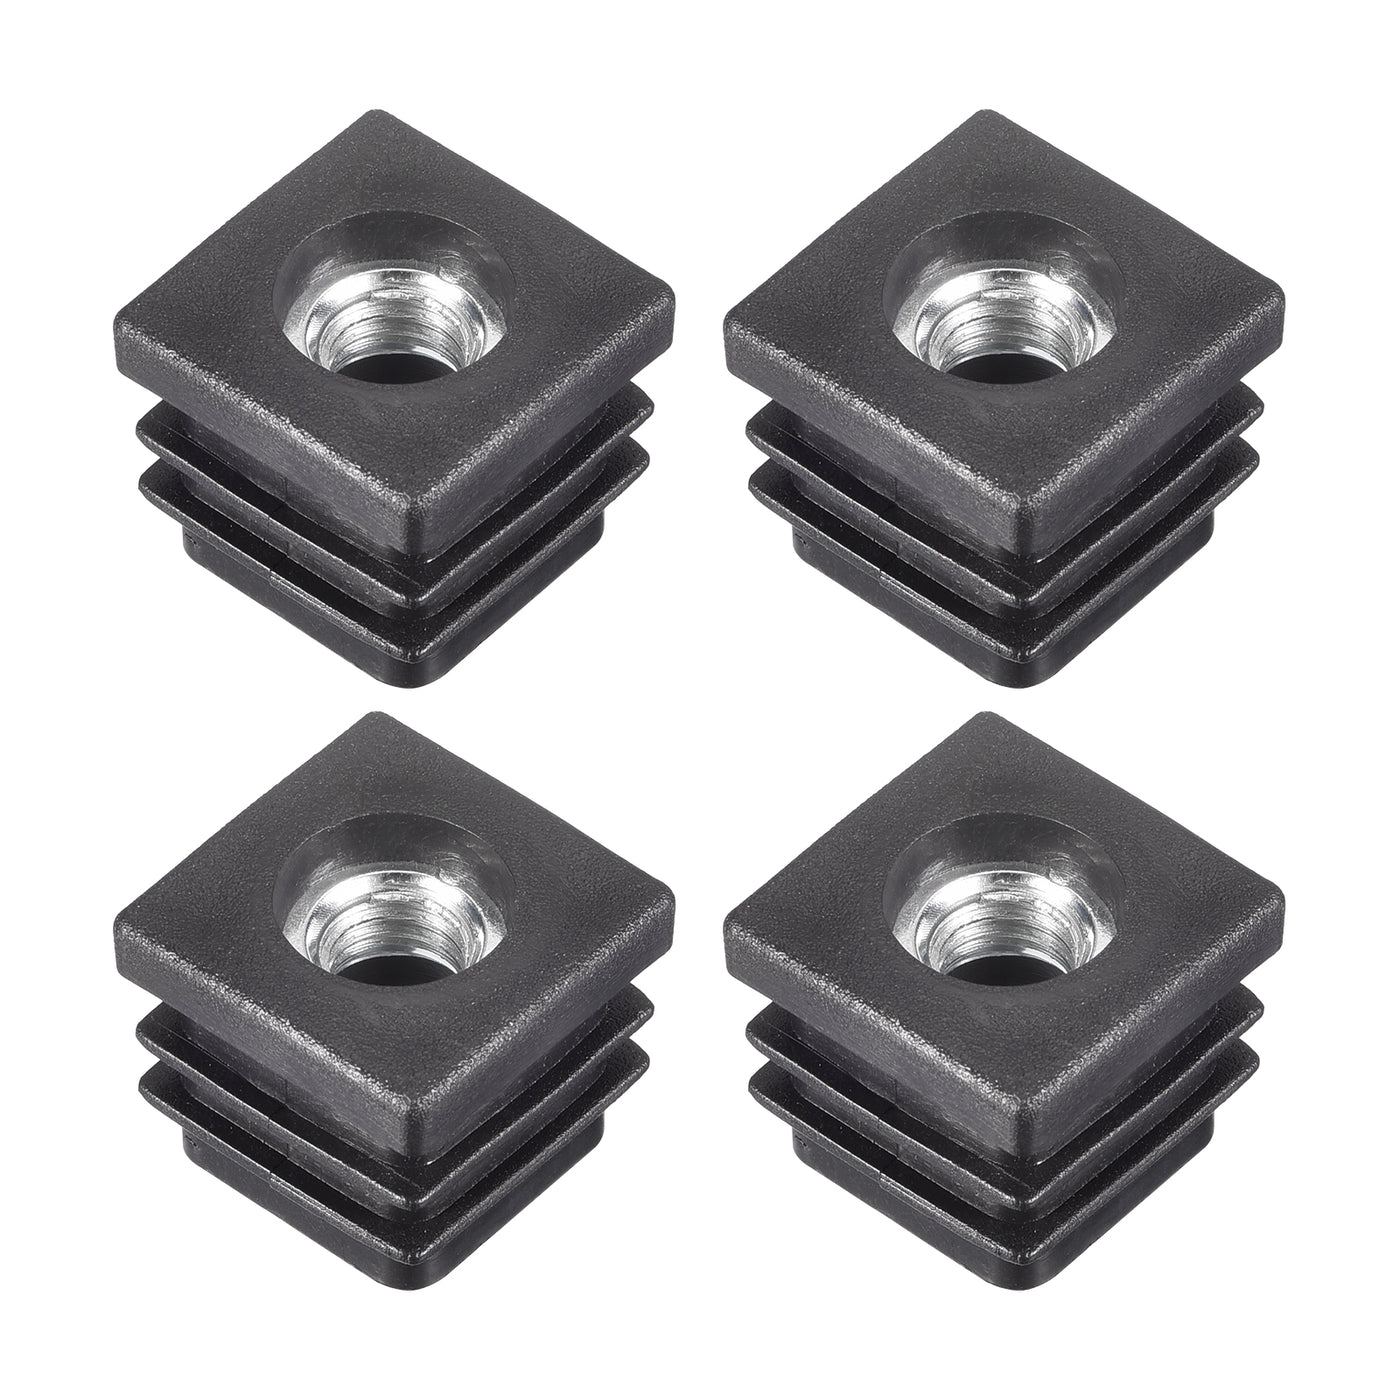 uxcell Uxcell 4Pcs 0.79"x0.79" Caster Insert with Thread, Square M8 Thread for Furniture